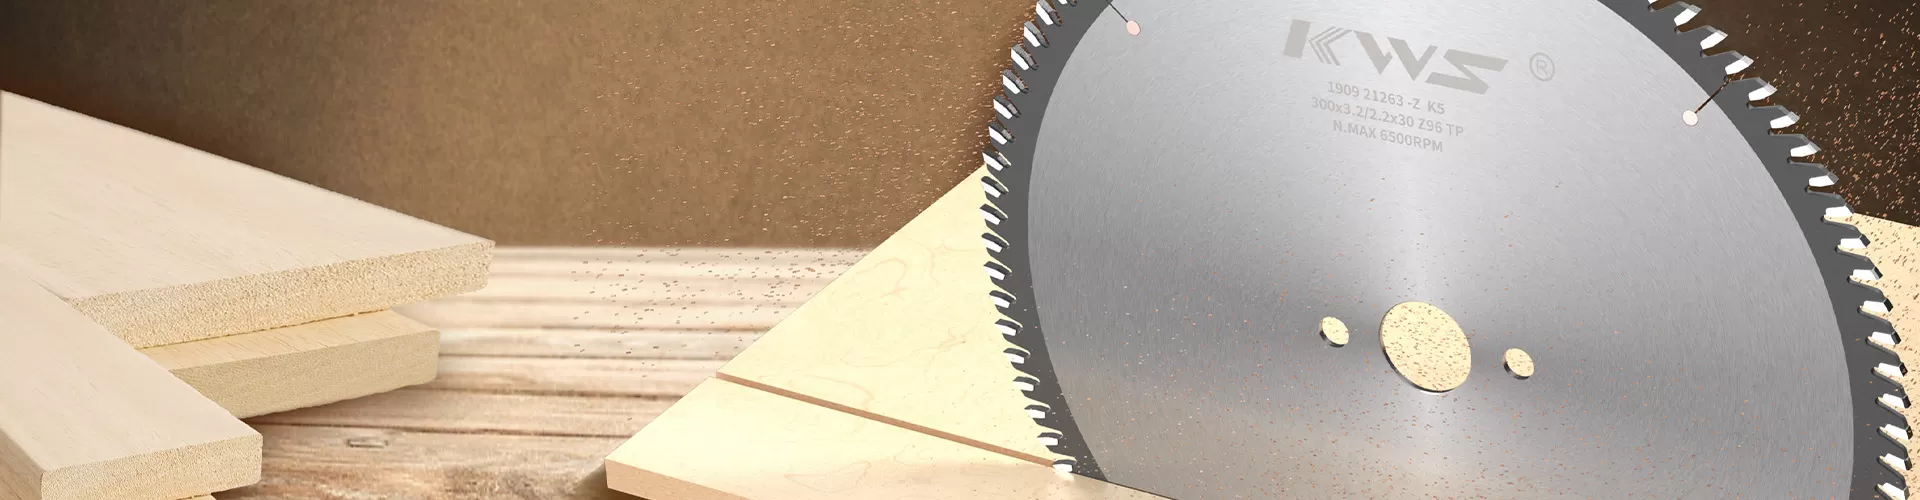 Cold Saw for Stainless Steel Cutting